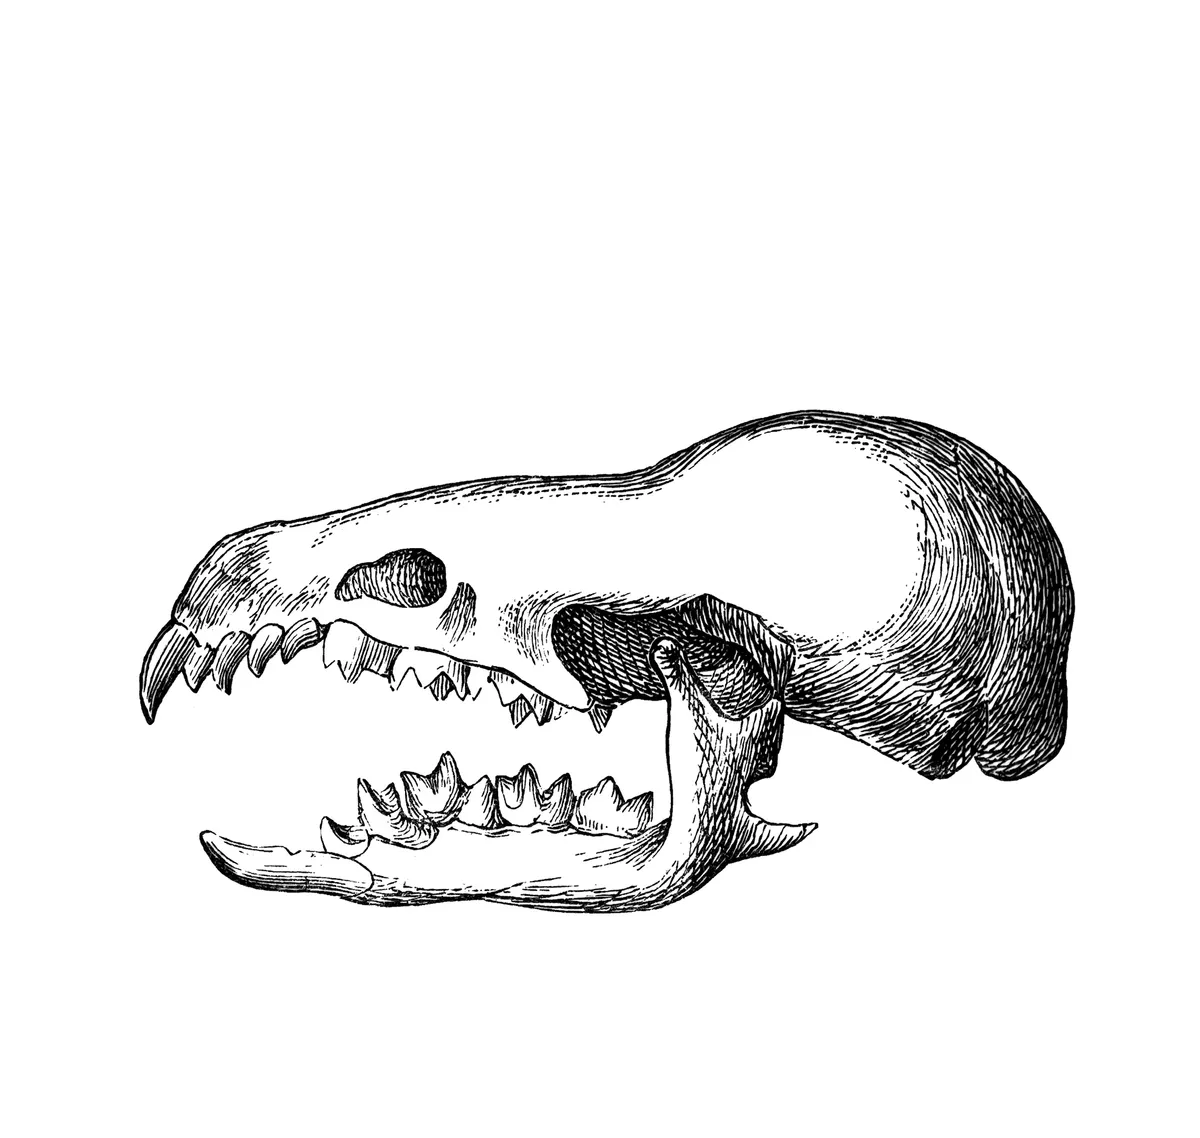 An antique engraved illustration of a water shrew skull, from Popular Encyclopedia, published 1894 and digitally restored. © mikroman/Getty